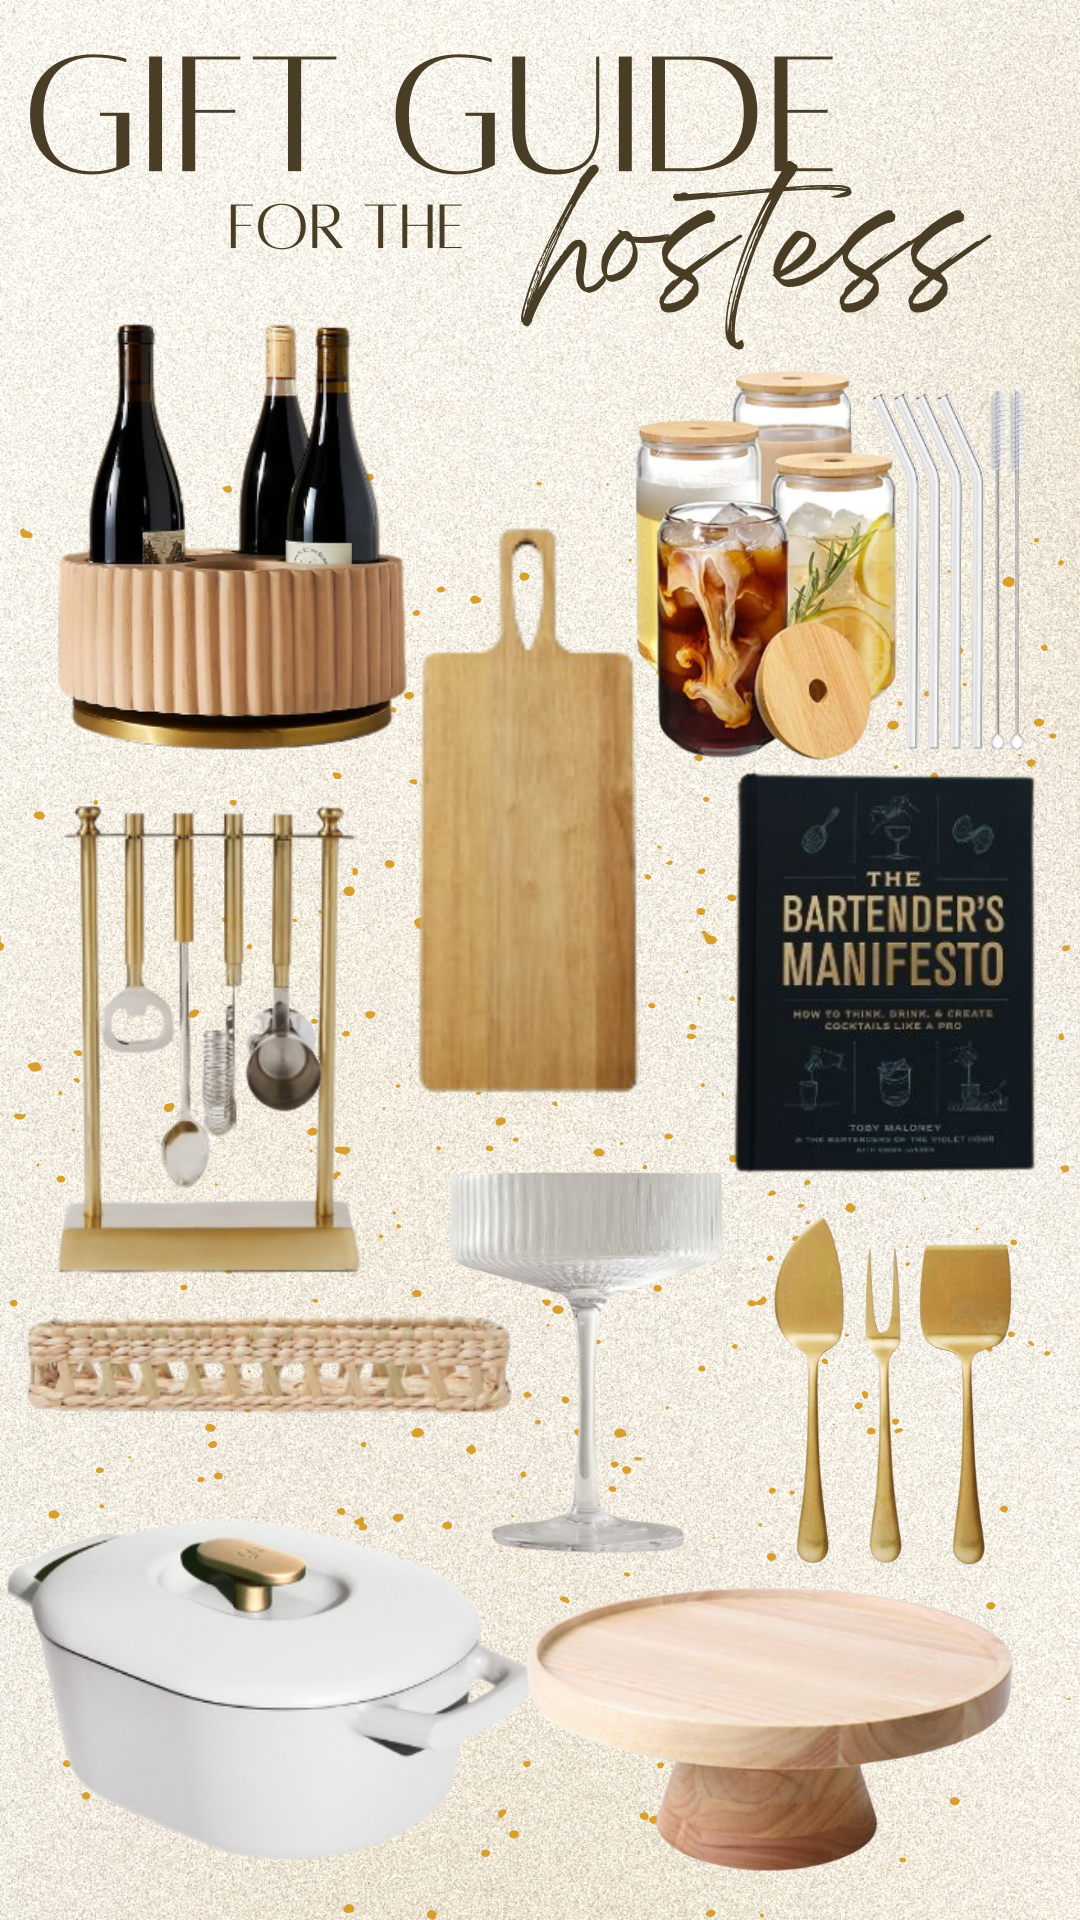 Holiday Gift Guide-Jacyln De Leon Style. Holiday gift guide for the hostess. Holiday gifting ideas for home/hostess.